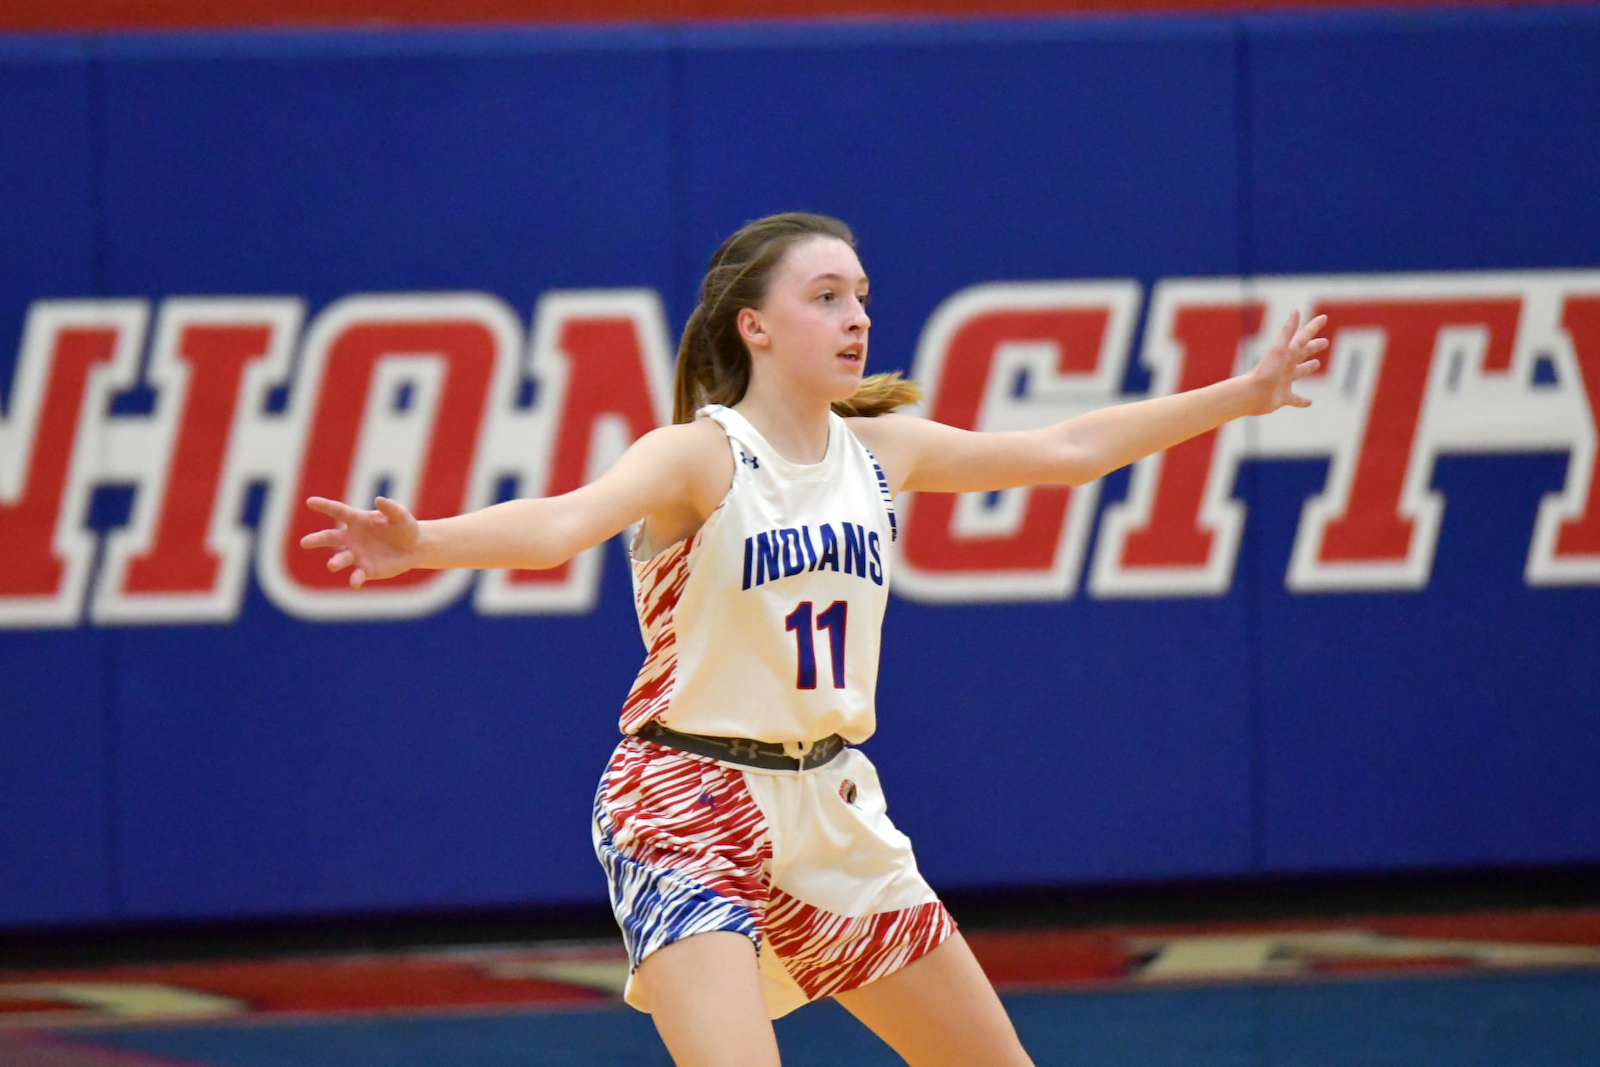 Indians defeat New Castle on the Road cover photo